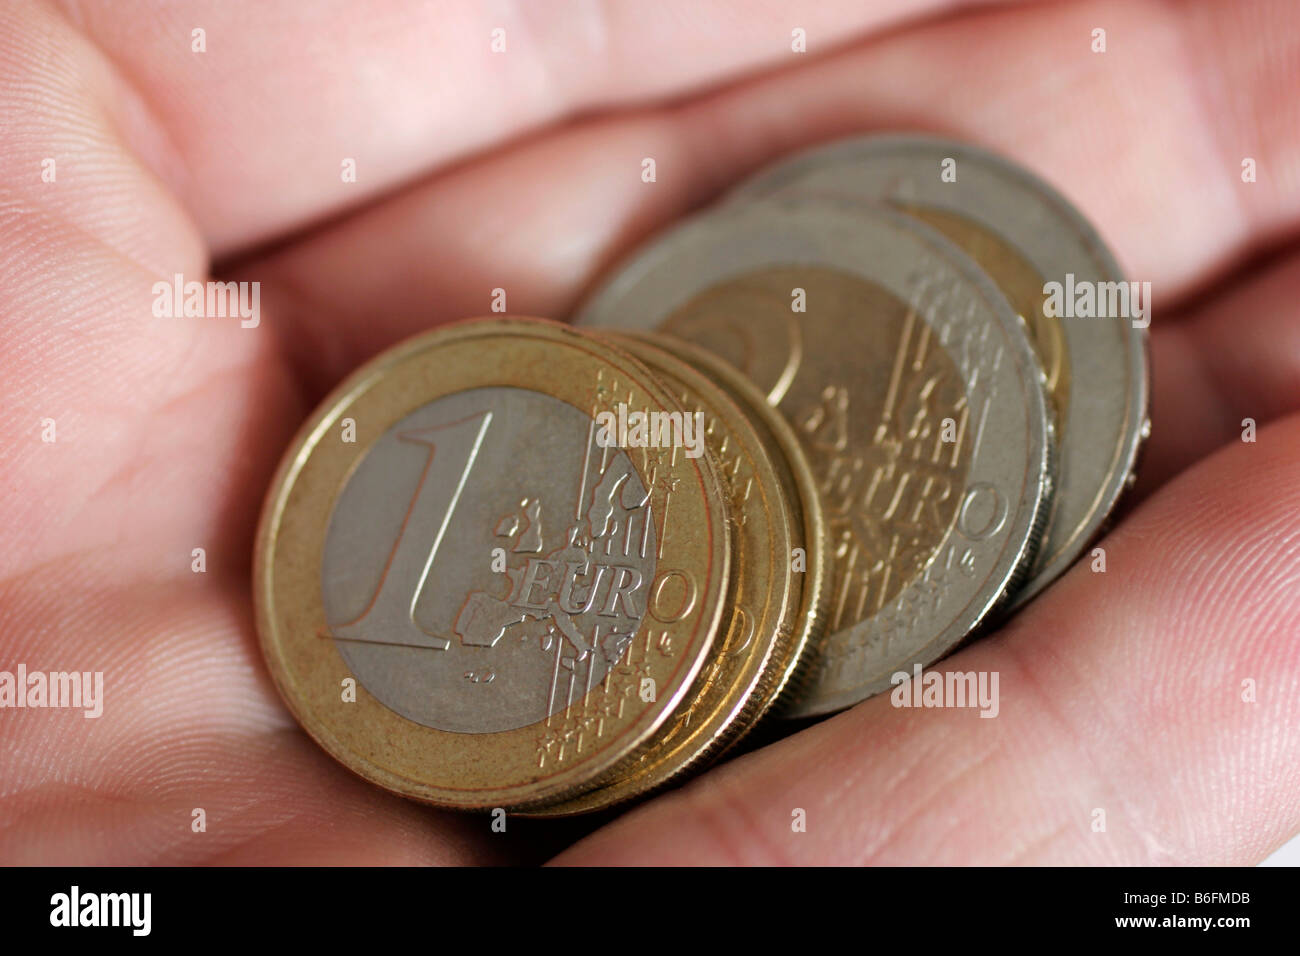 Euro-coins in hand Stock Photo